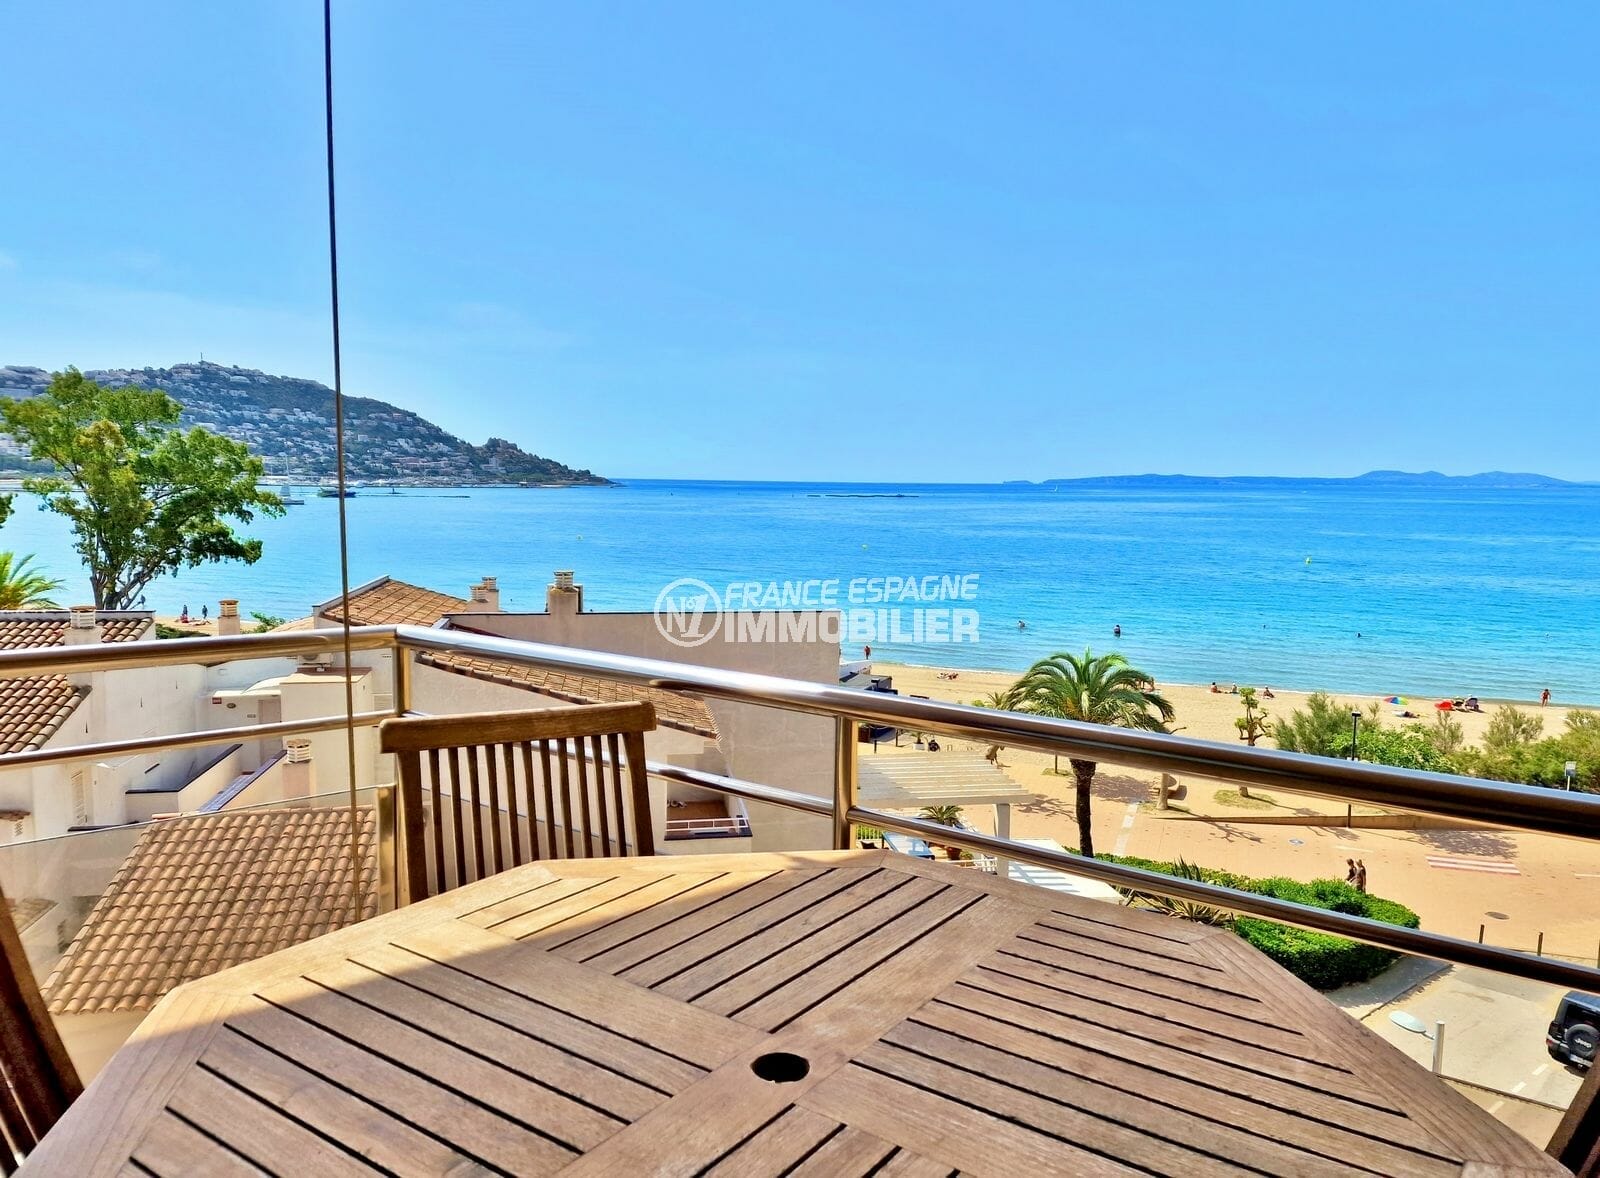 Exclusive roses - atico front sea view, 1st line, beach 20m